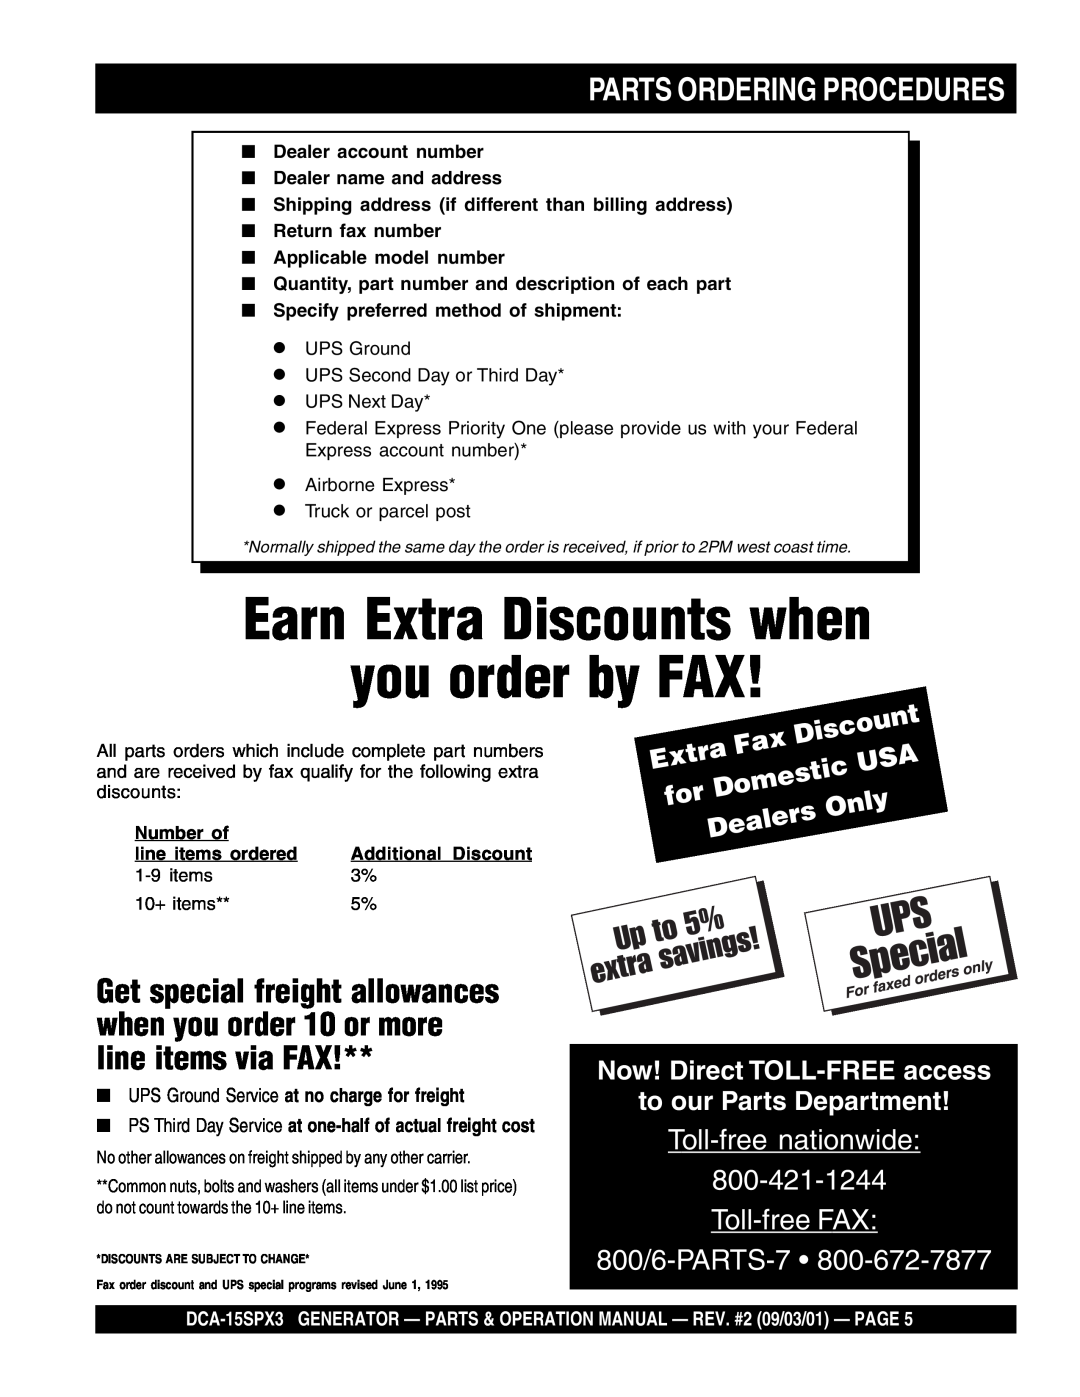 Multiquip DCA-15SPX3 Earn Extra Discounts when you order by FAX, Parts Ordering Procedures, Domestic, Only, Dealers 